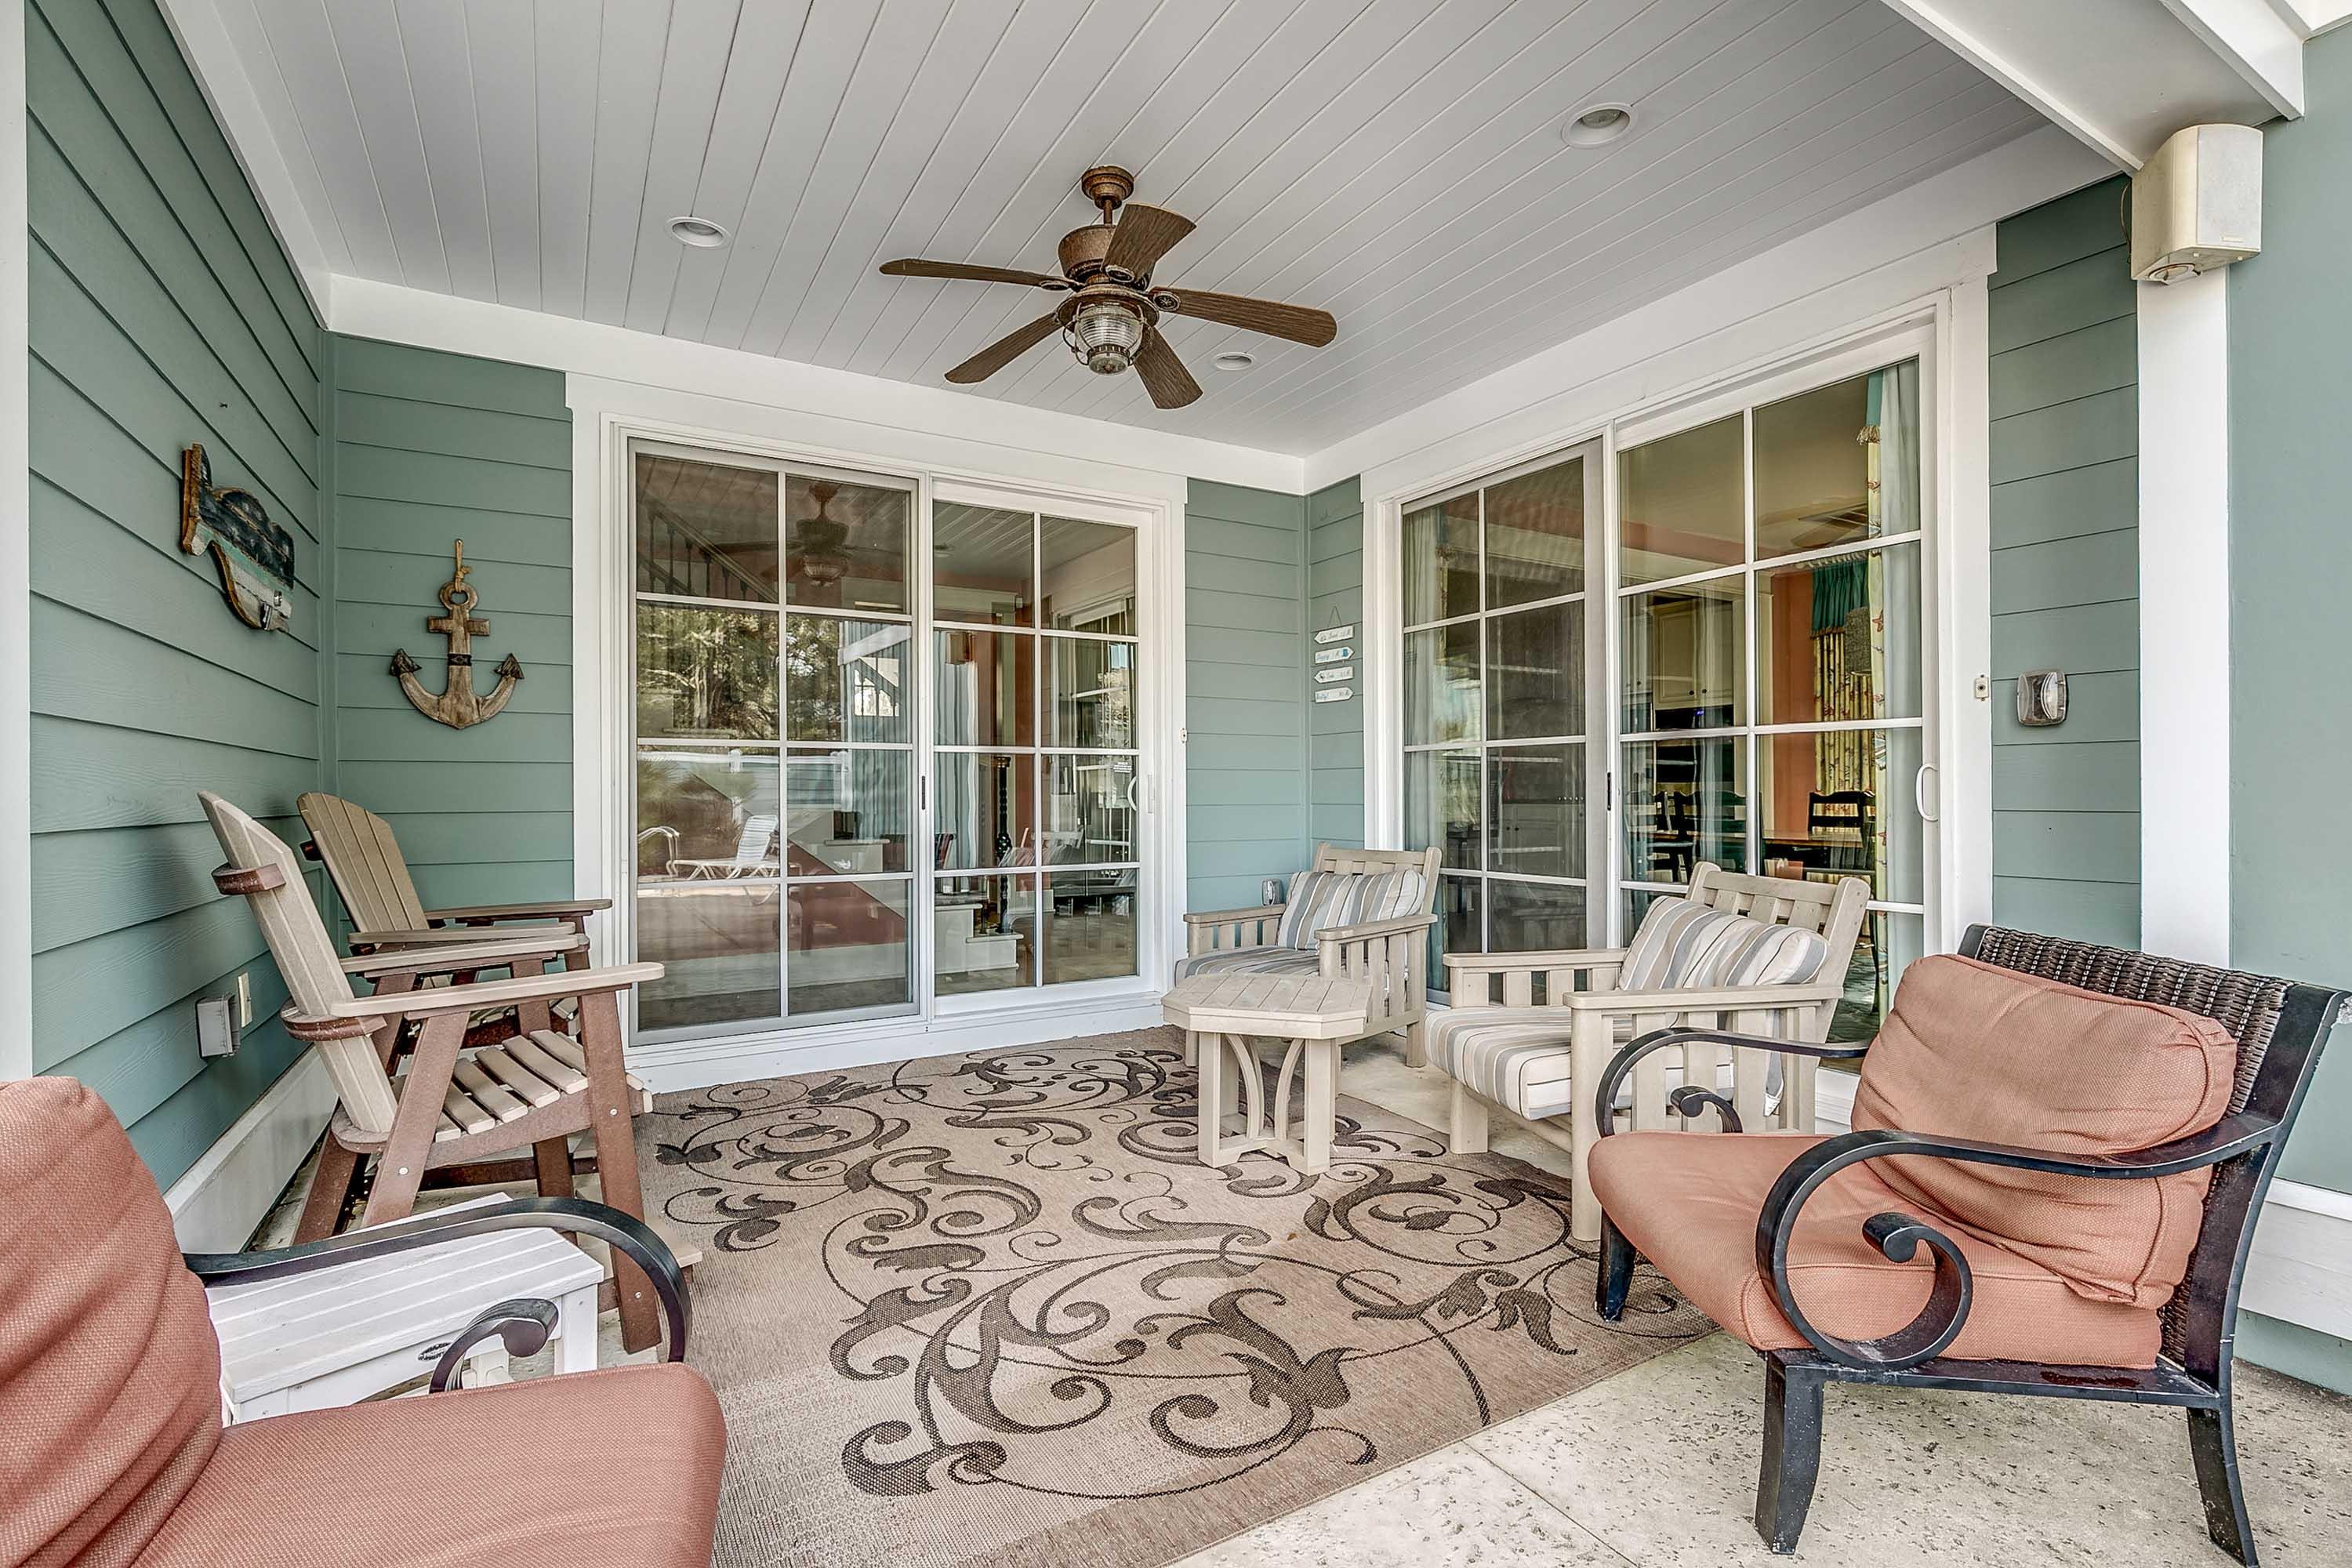 North Beach Cottages - 4 Bedroom Banyan Luxury Home w/ Private Pool